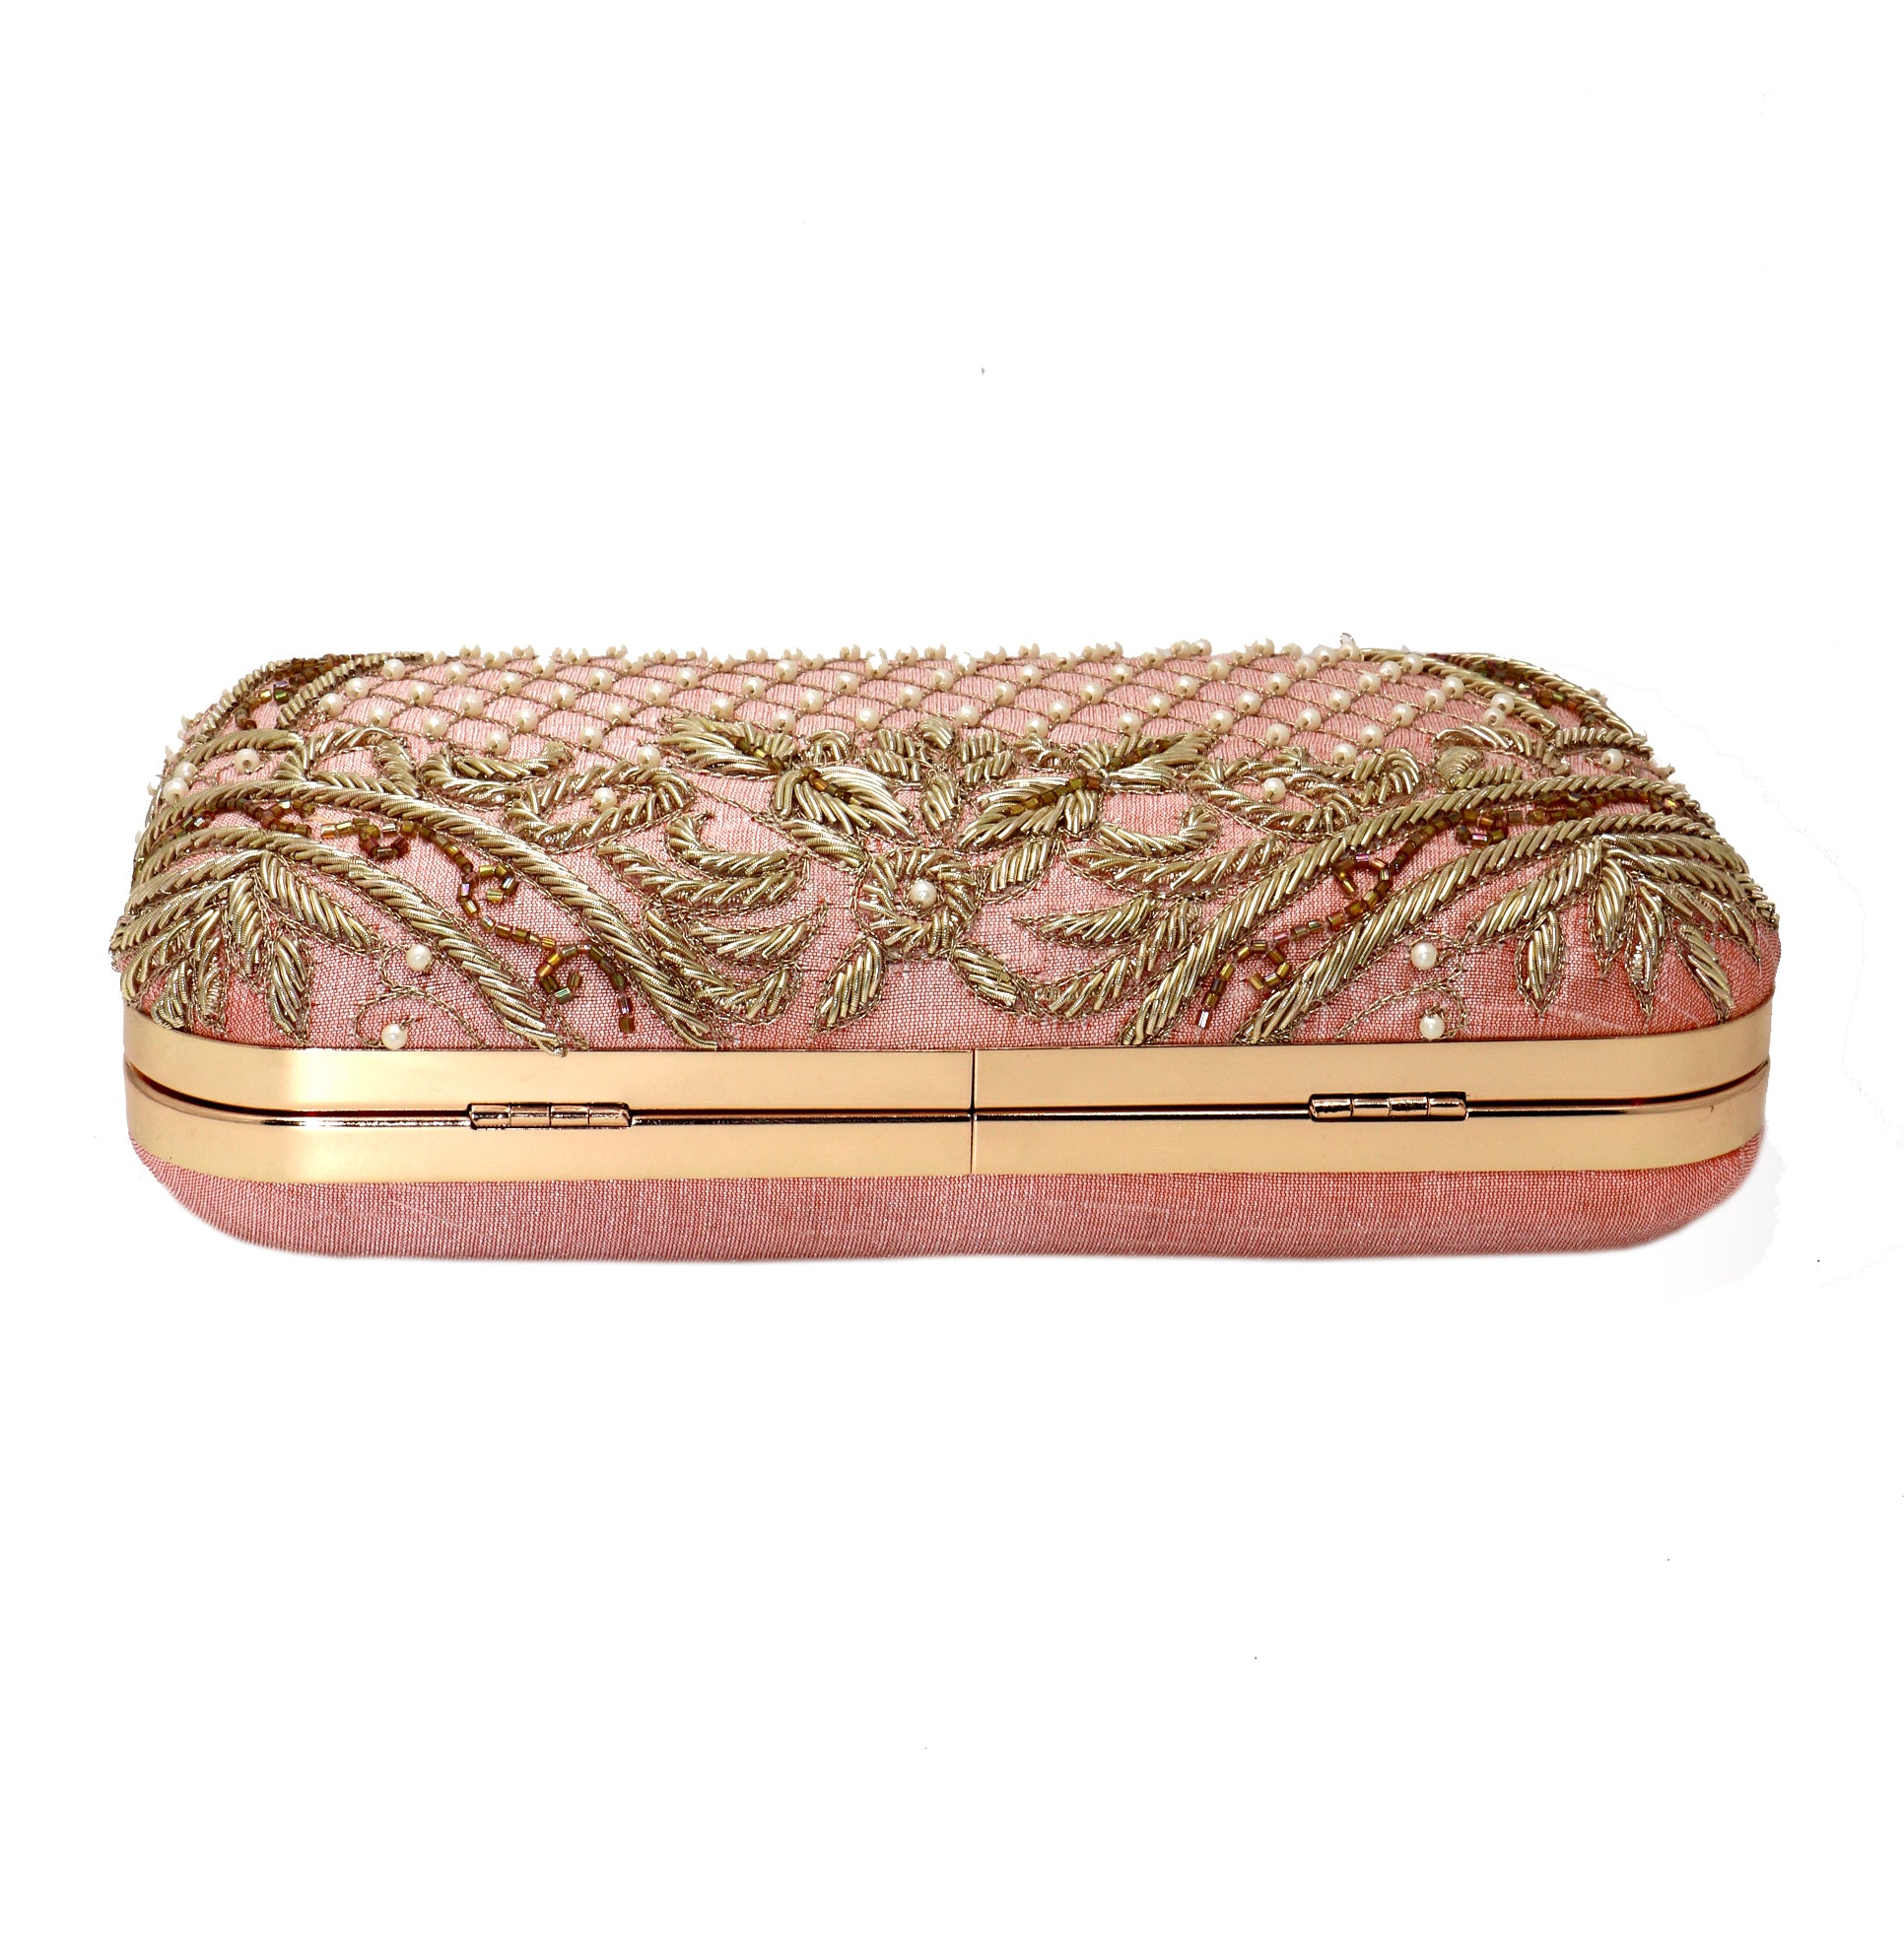 Women's Peach Color Adorn Embroidered & Embelished Party Clutch - VASTANS